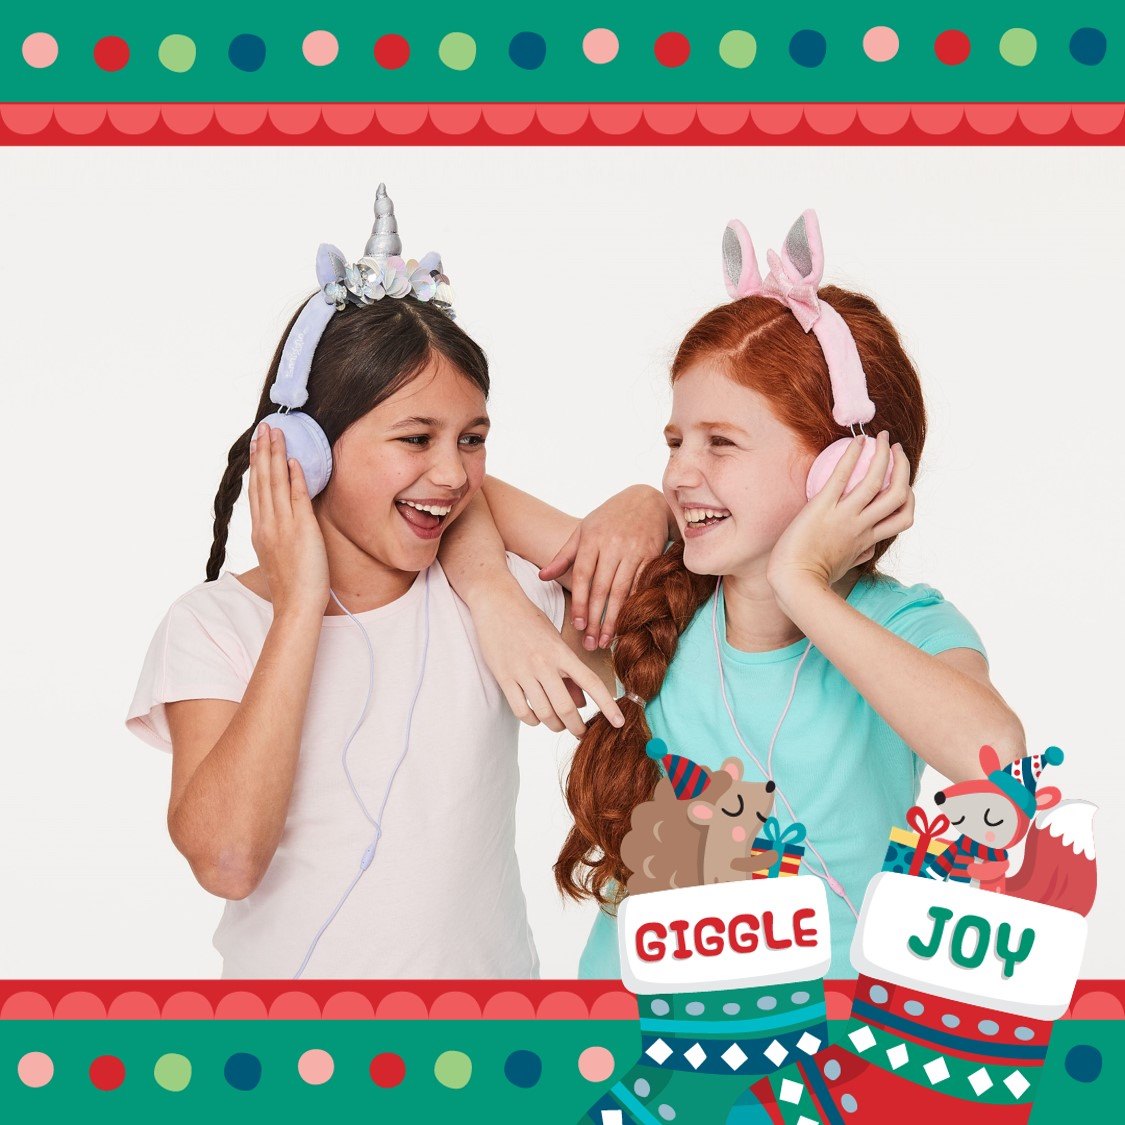 Listen 🎵to your favourite tunes with our Fantasy headphones. Choose between unicorn 🦄and bunny 🐰 this Christmas. Shop in store now!